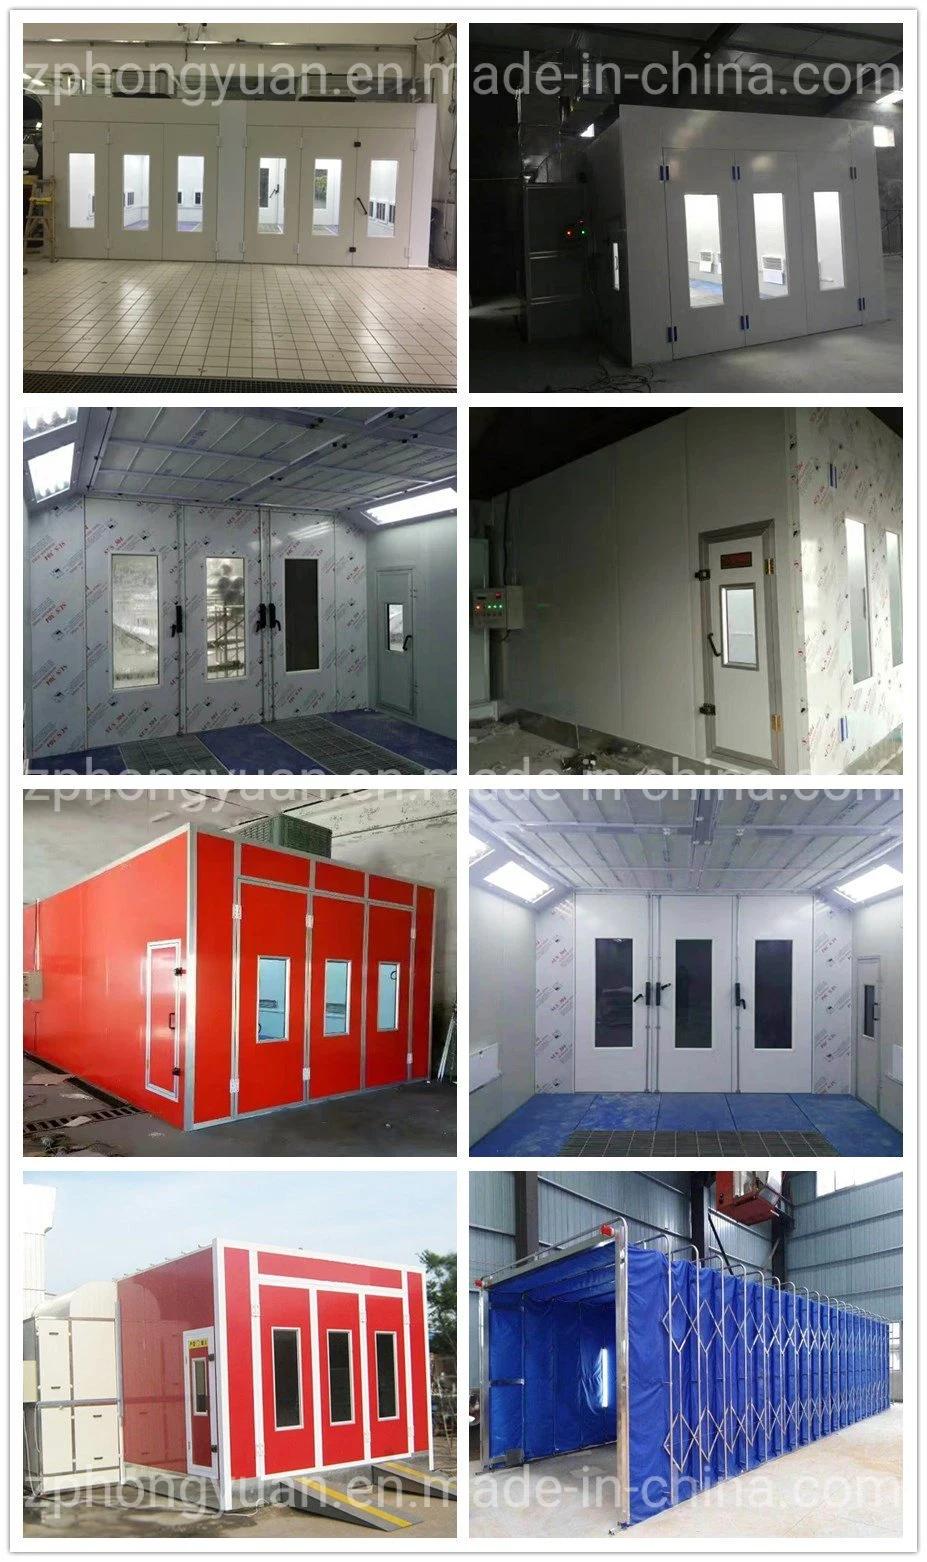 Automotive Painting Booth with Burner and Heat Insulation Panel